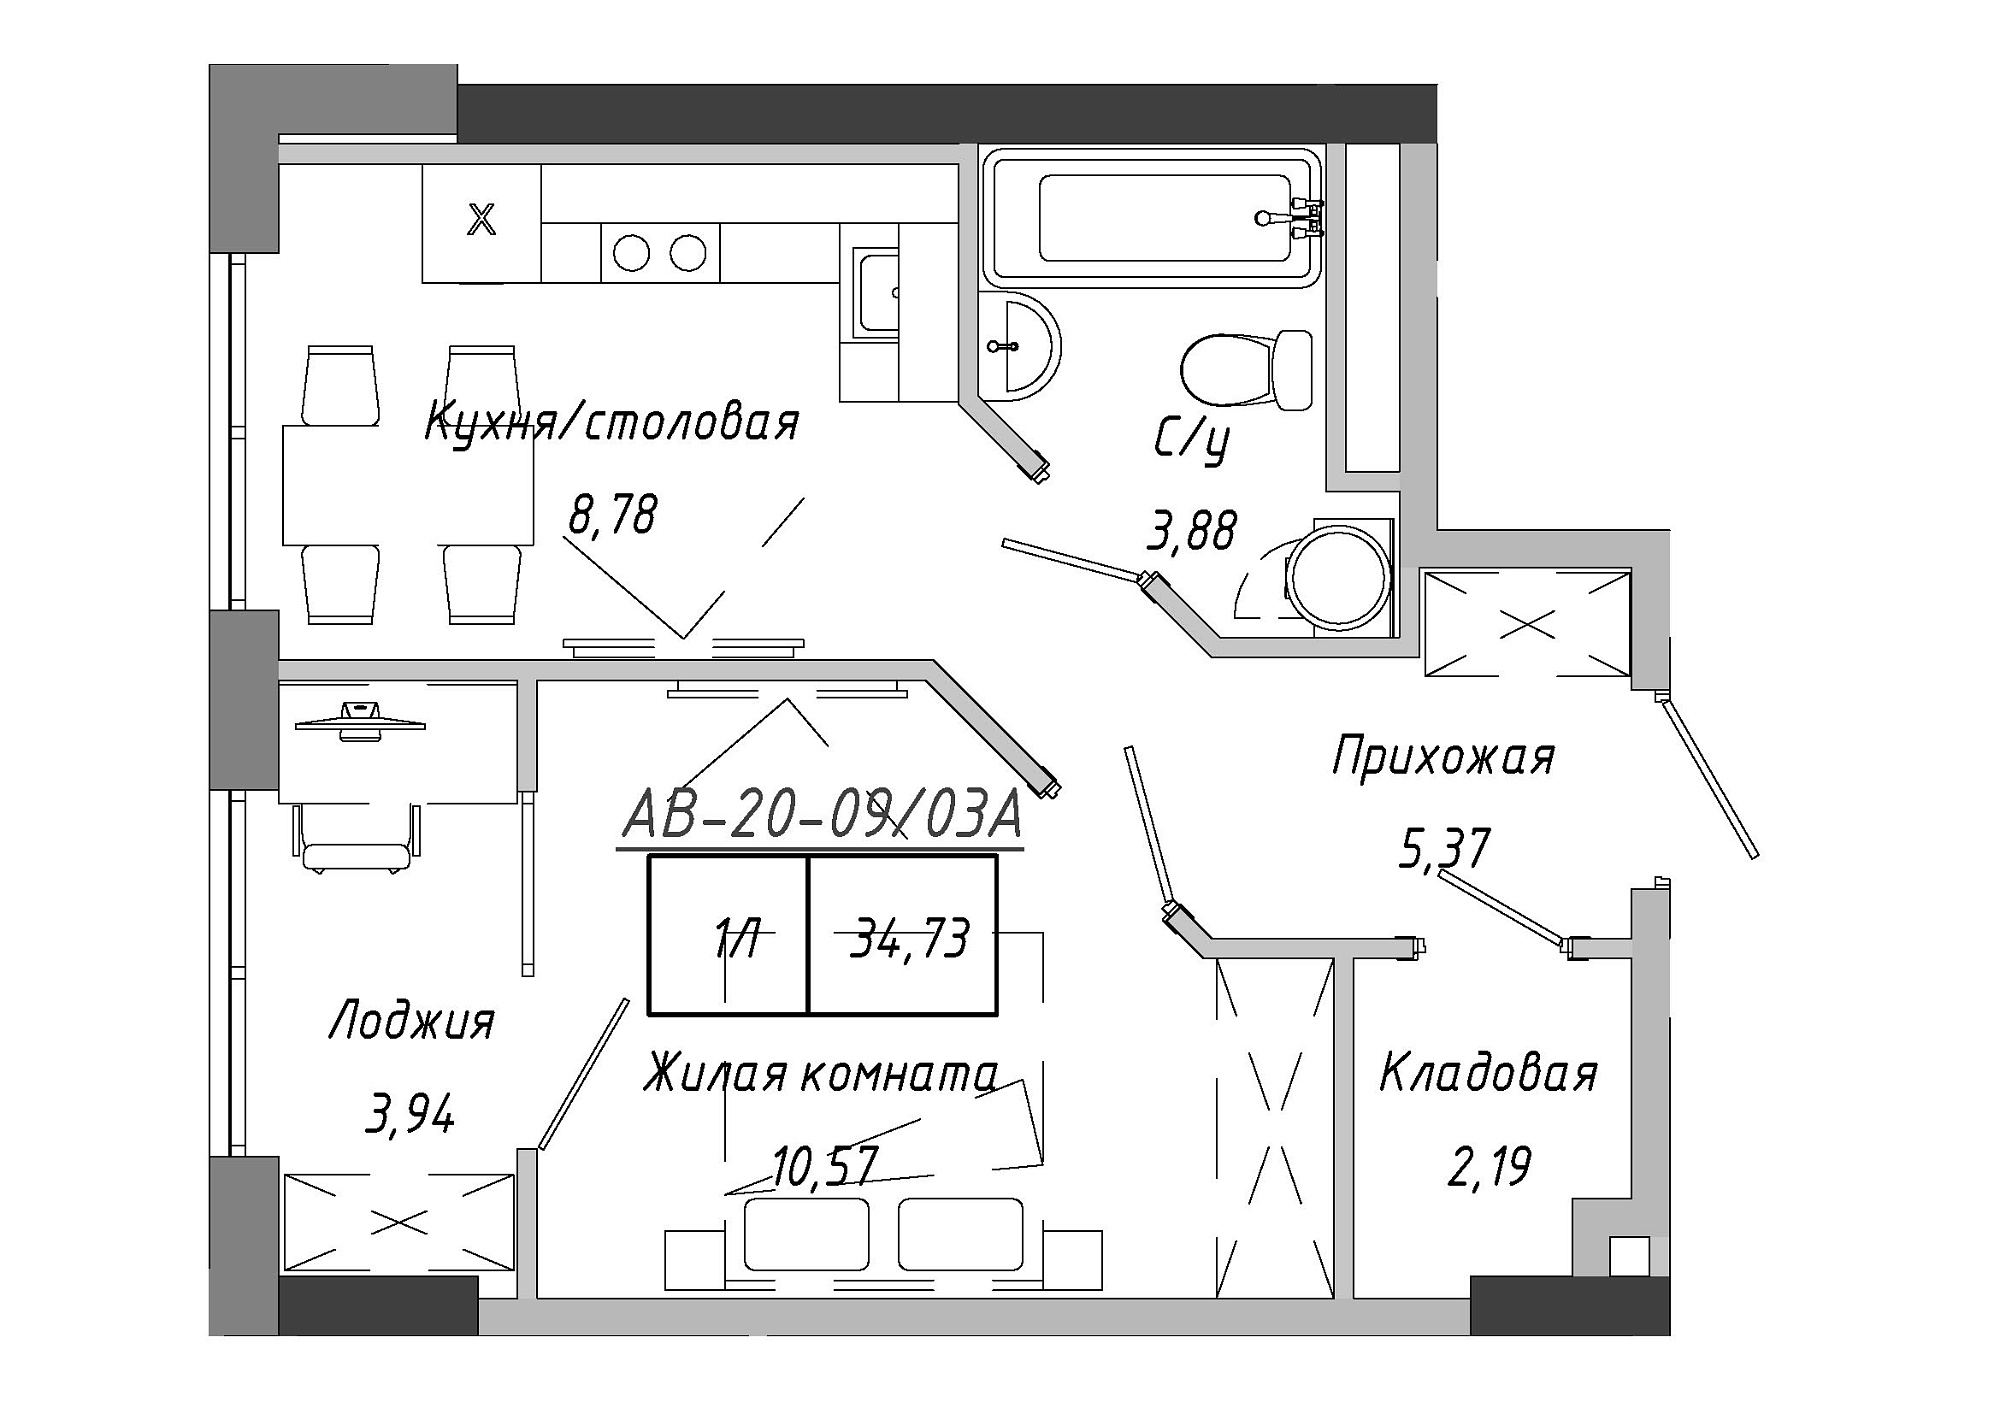 Planning 1-rm flats area 35.26m2, AB-20-09/0003а.